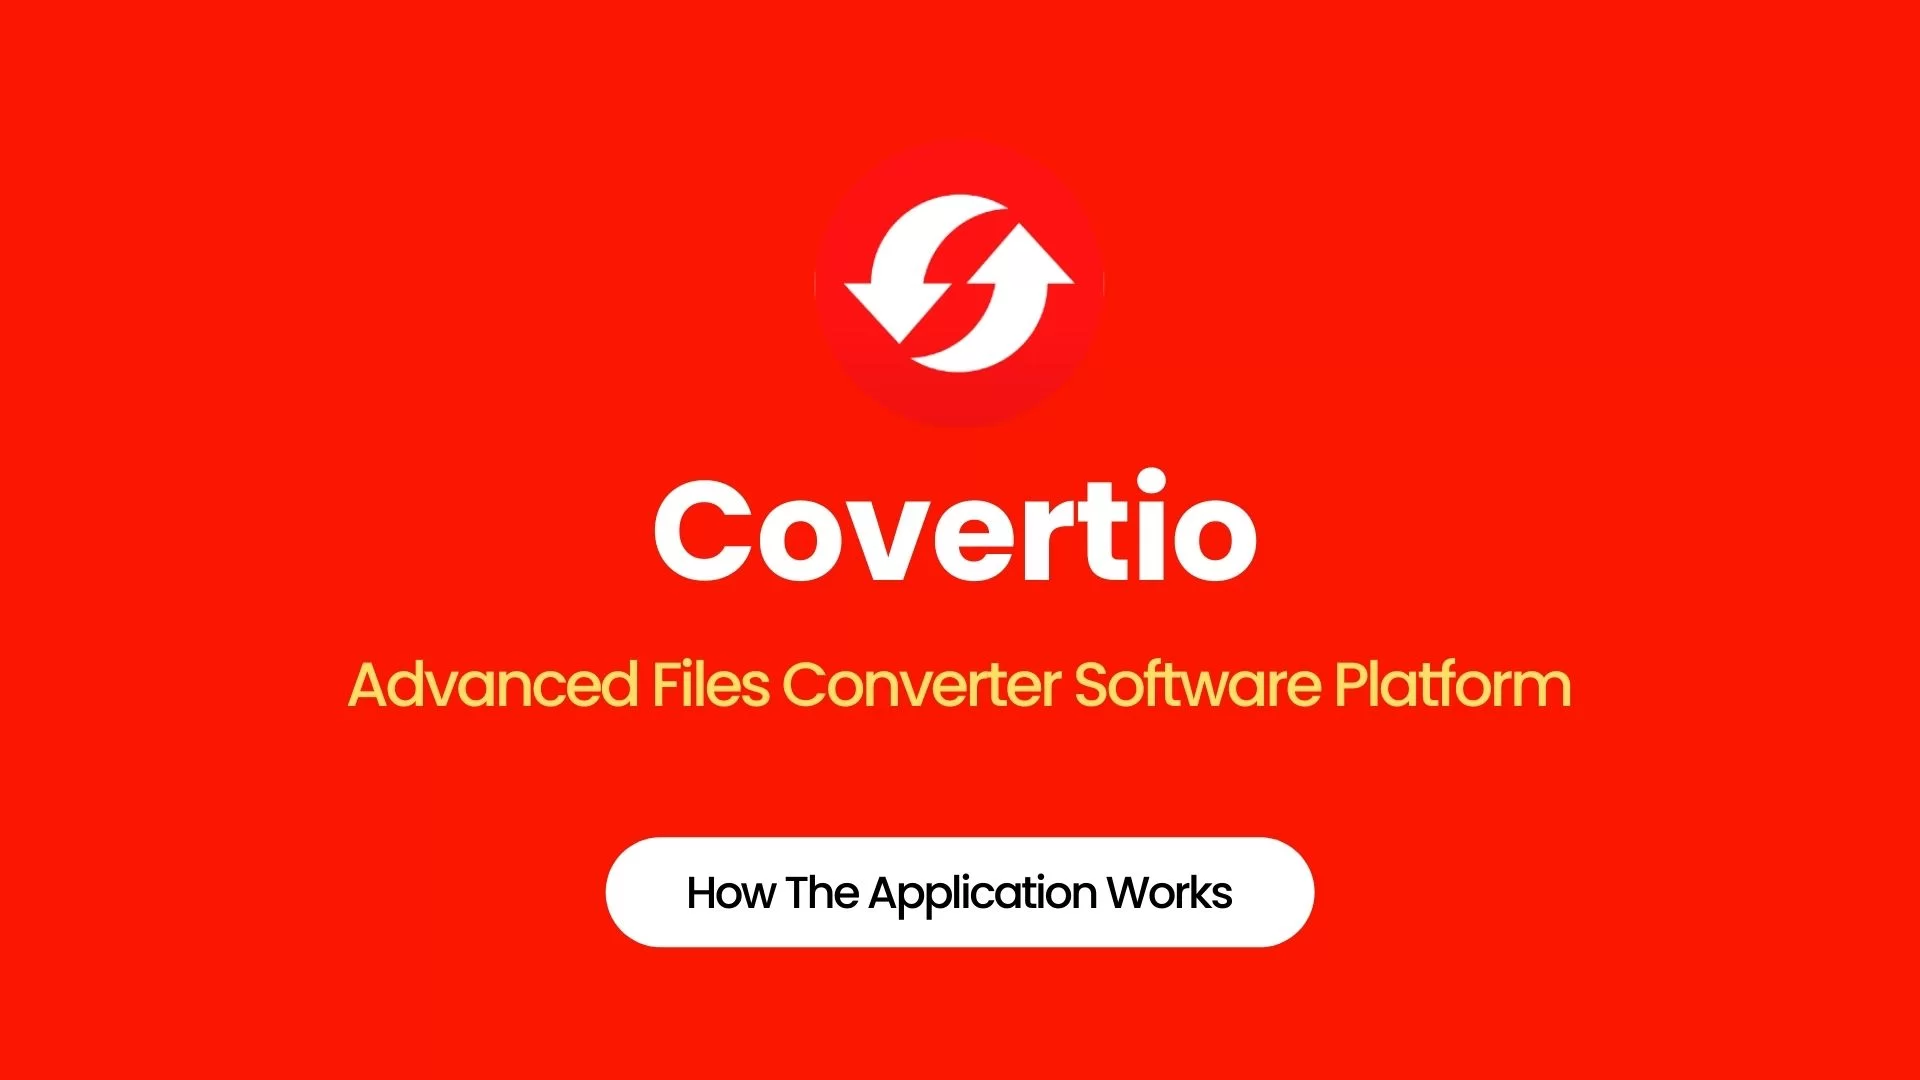 What Is Covertio Converter Software?